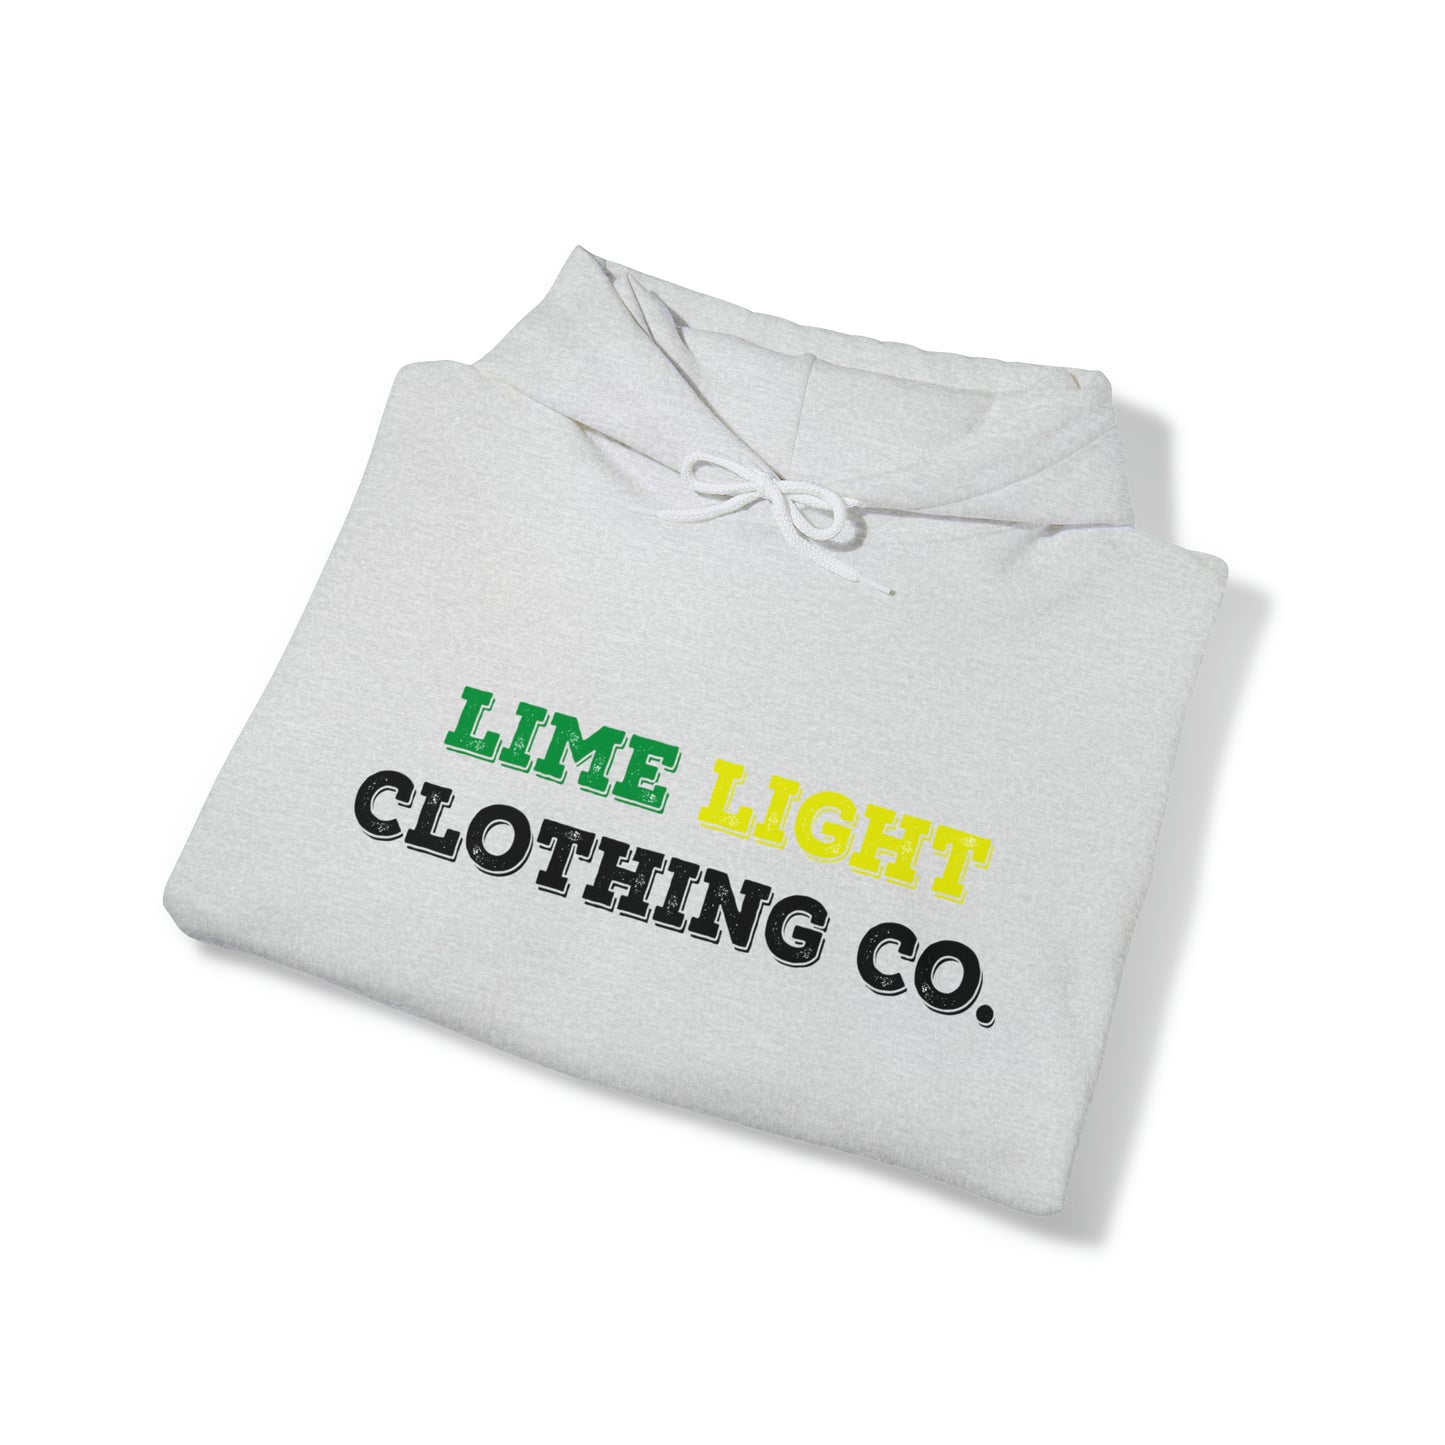 Hoodie | LL Clothing Co Design